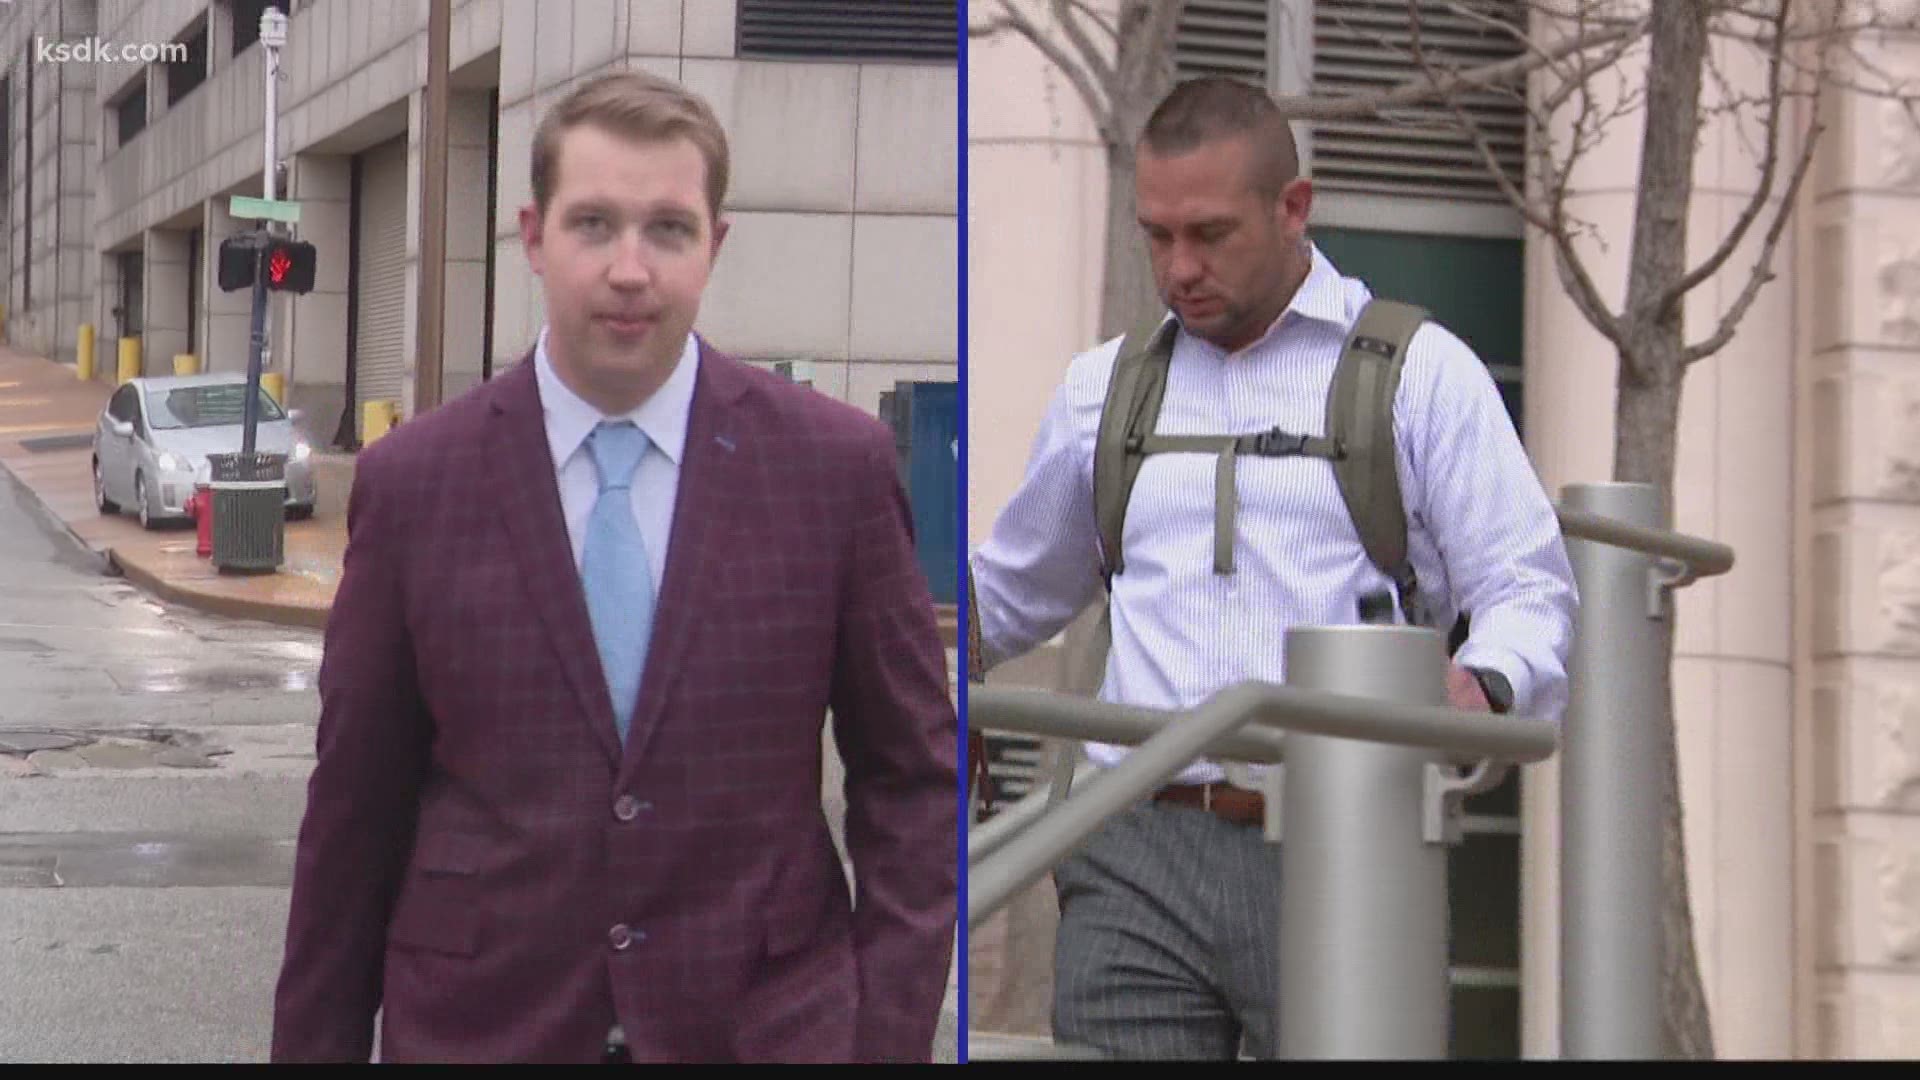 Former officers Dustin Boone and Christopher Myers are on trial for the second time for their role in the assault of undercover officer Luther Hall